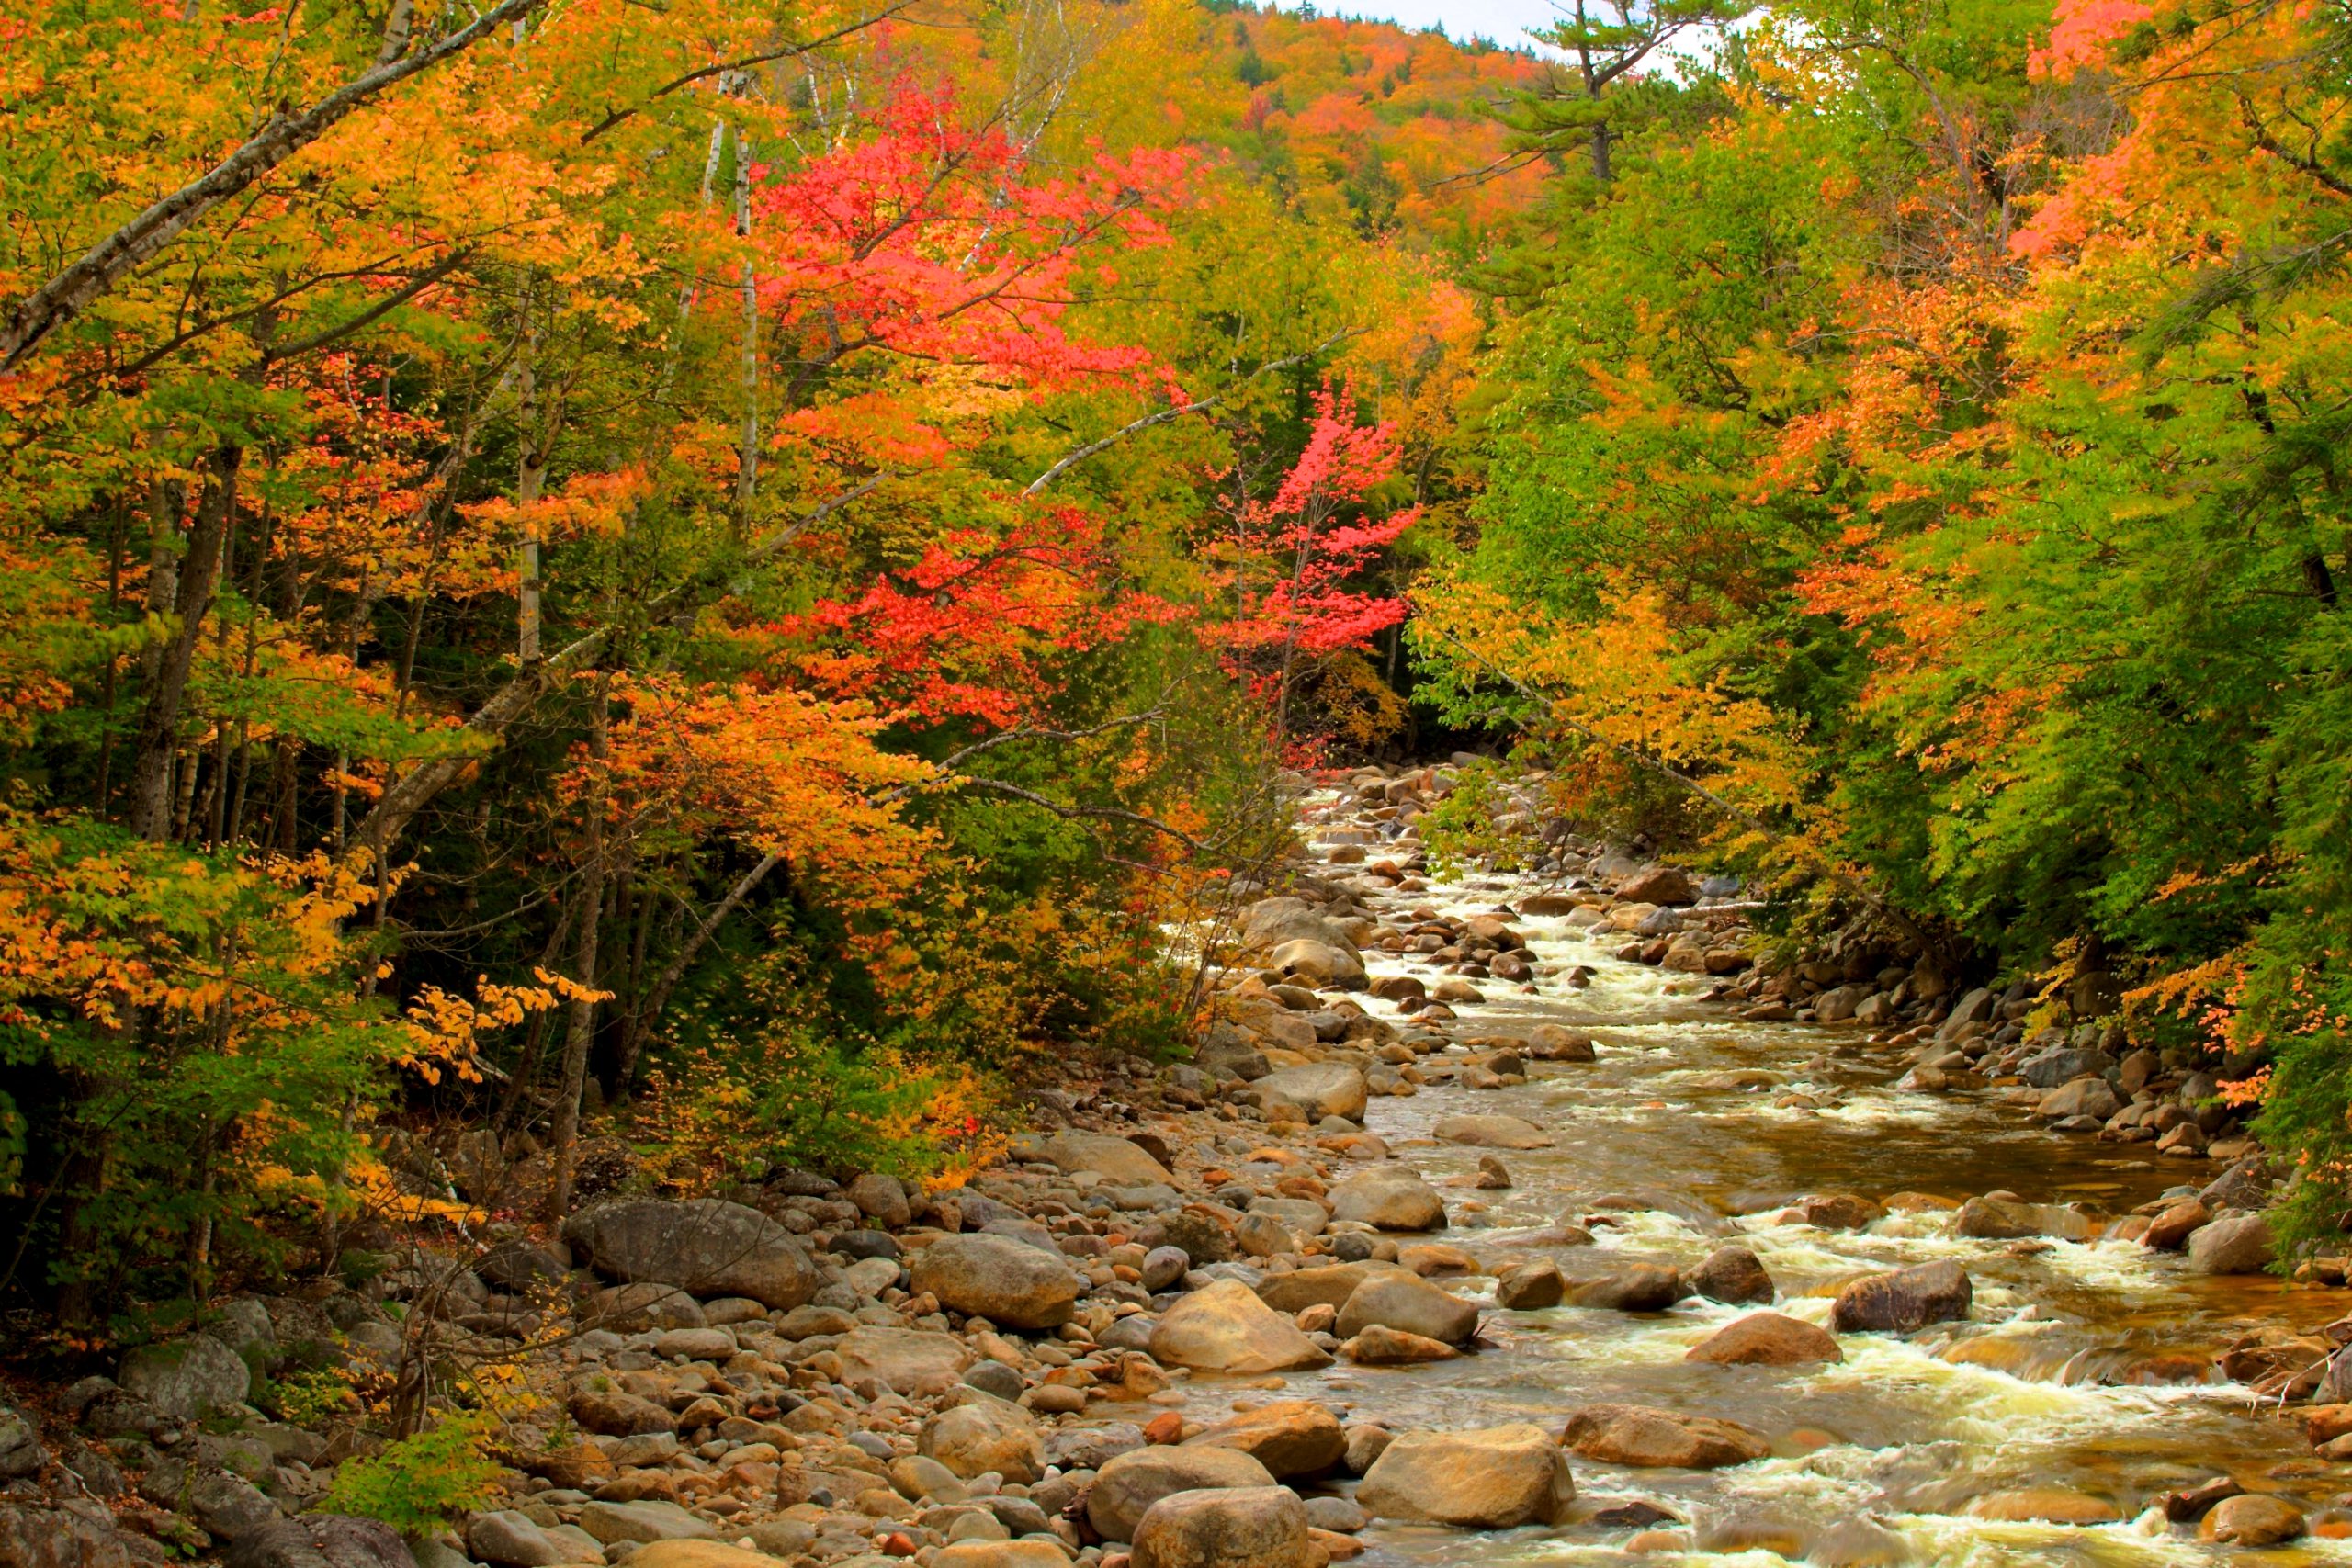 River Runs Through Fall Colors (user submitted)